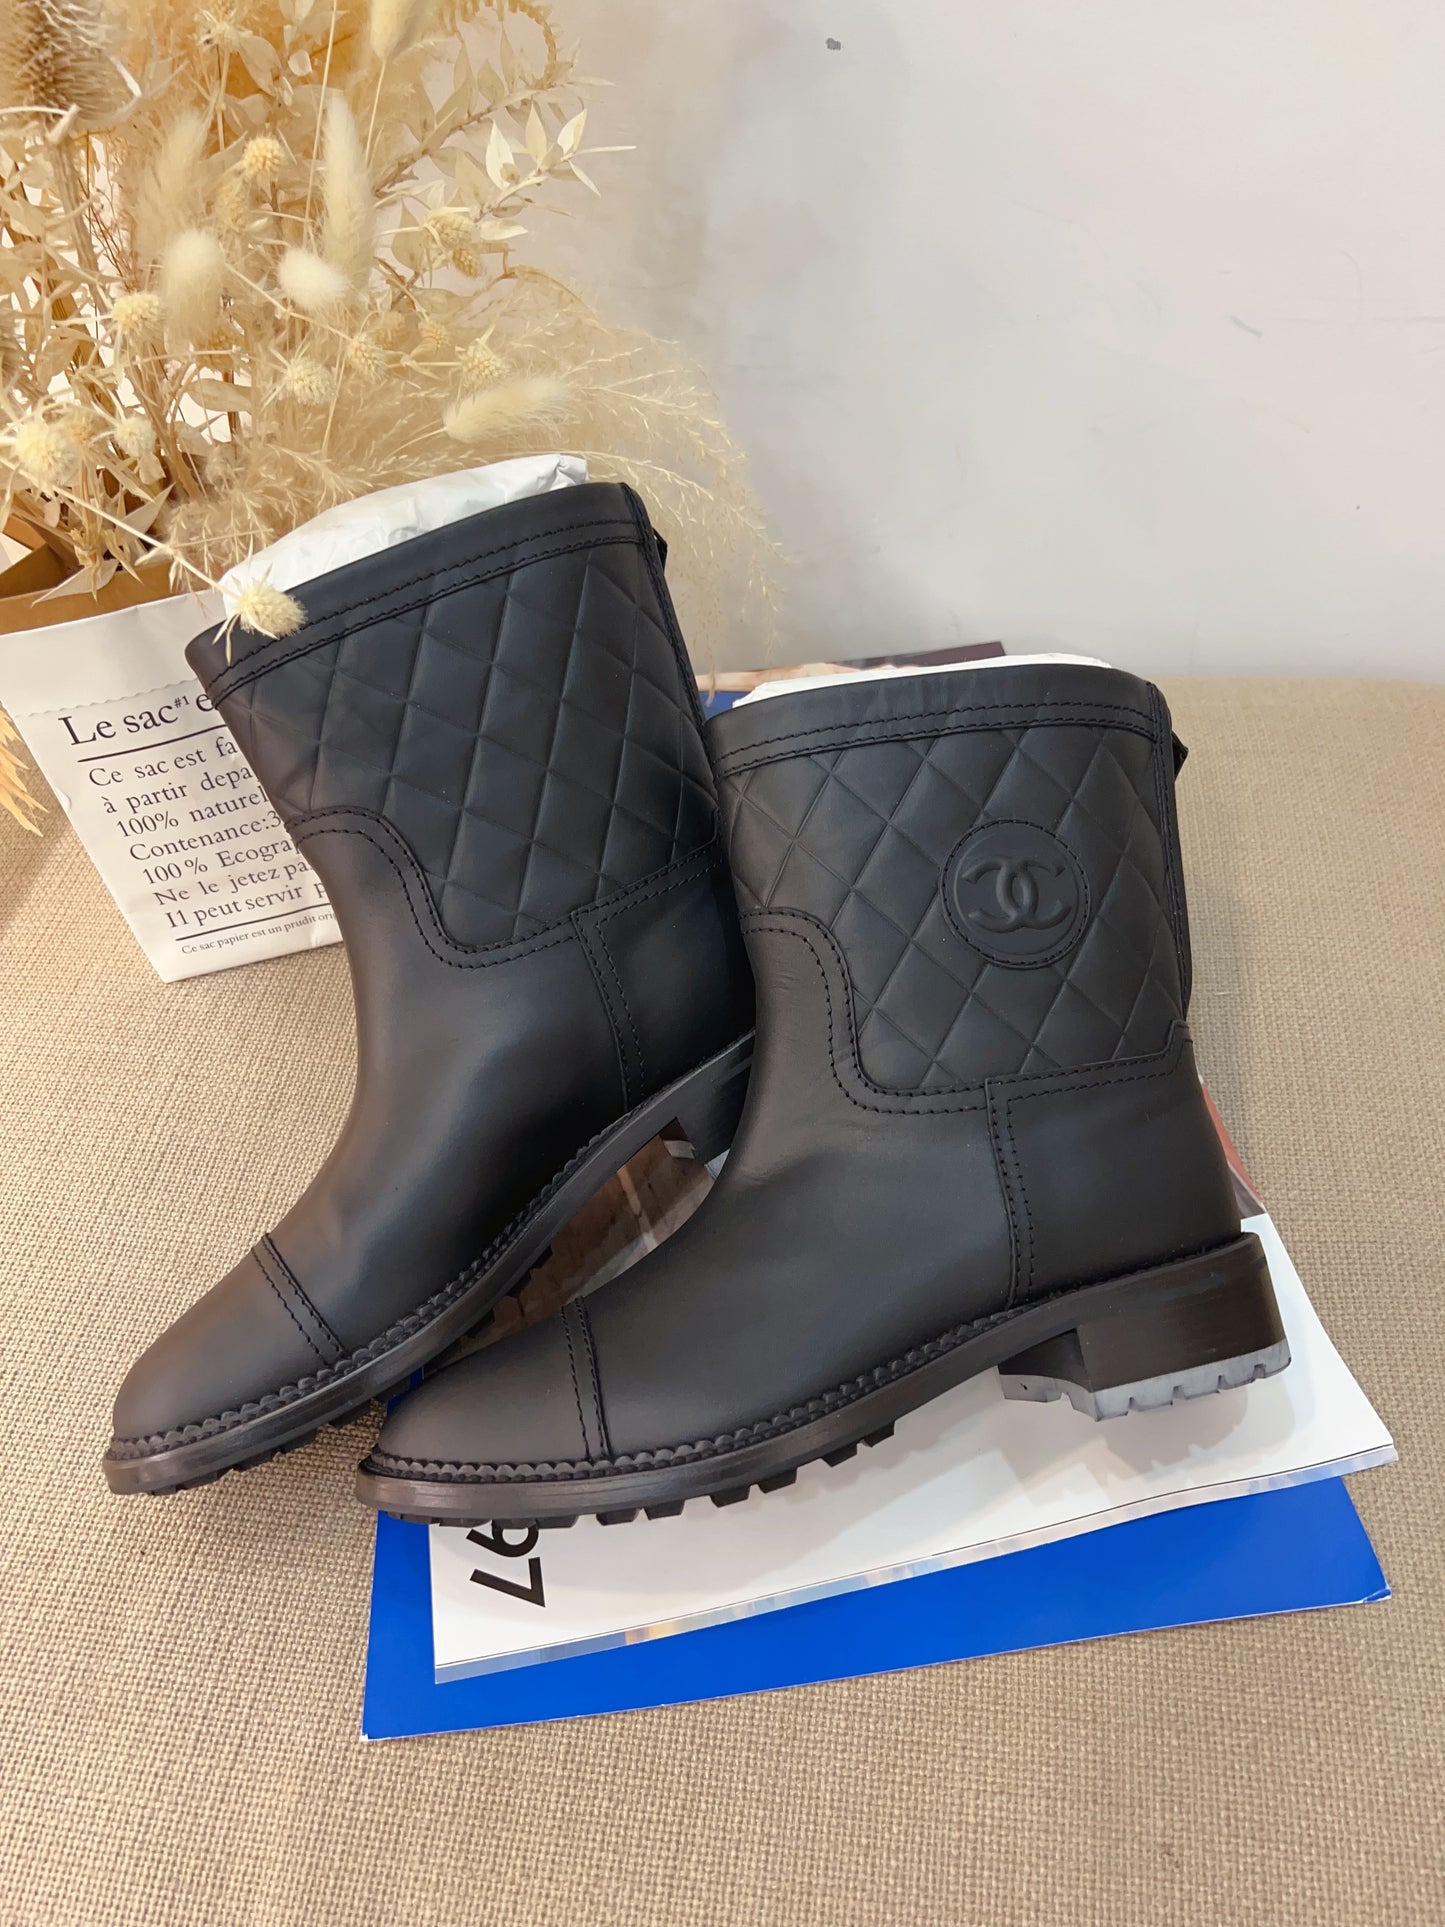 Chanel boots Size 38.5 New